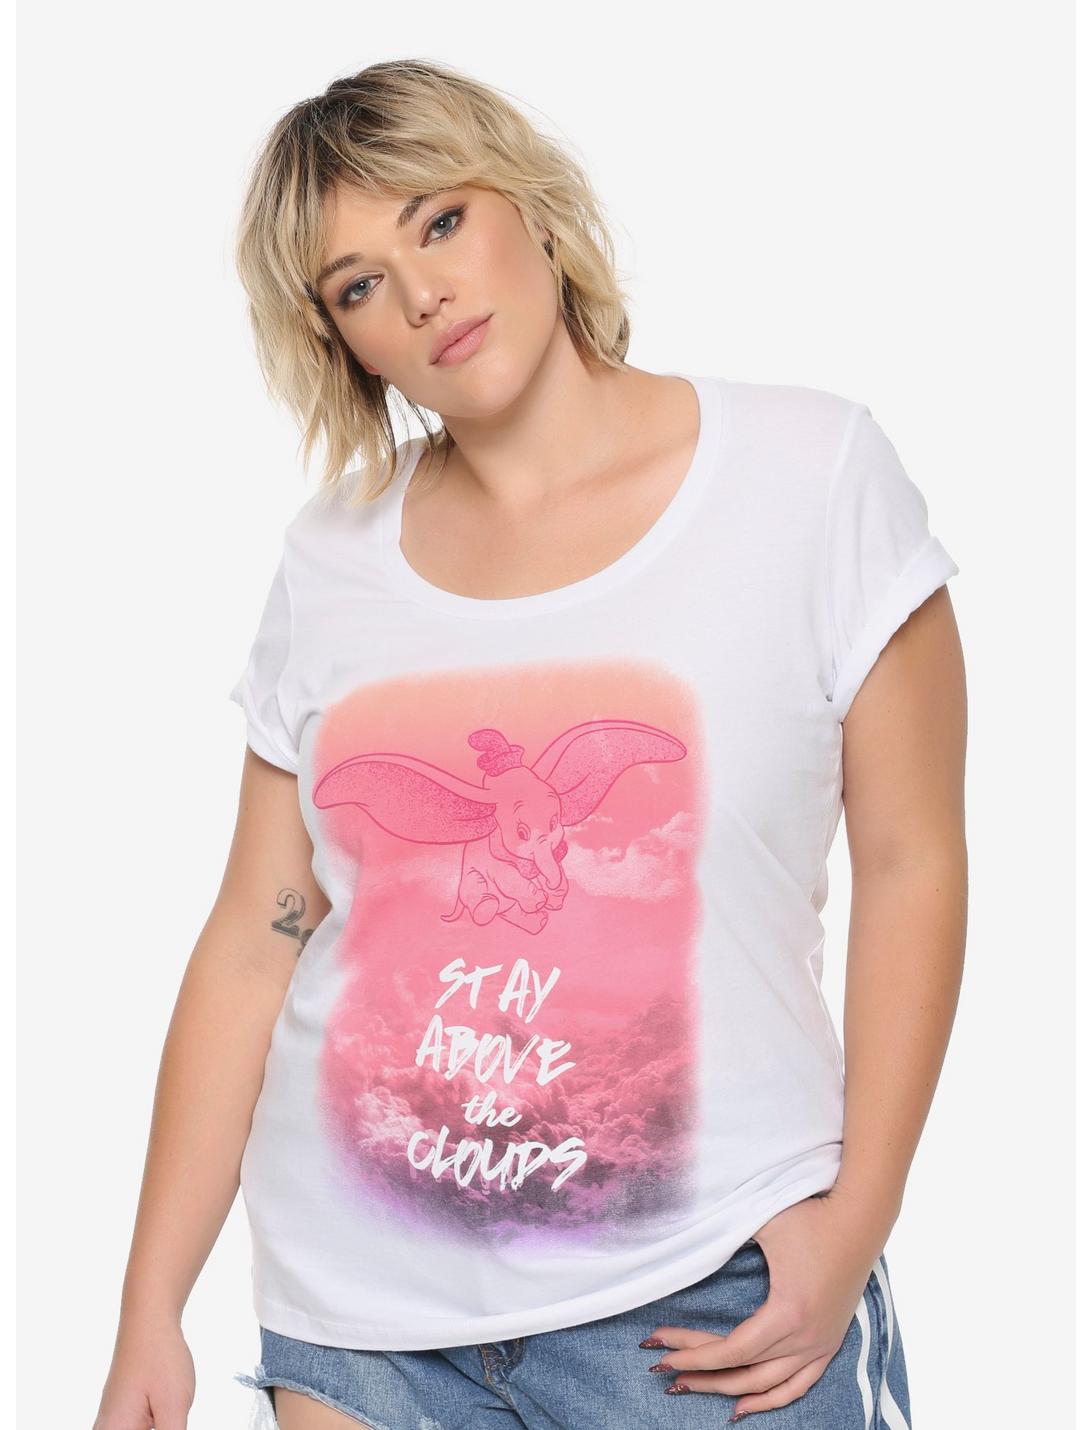 Disney Dumbo Stay Above The Clouds Girls T-Shirt Plus Size, PINK, hi-res